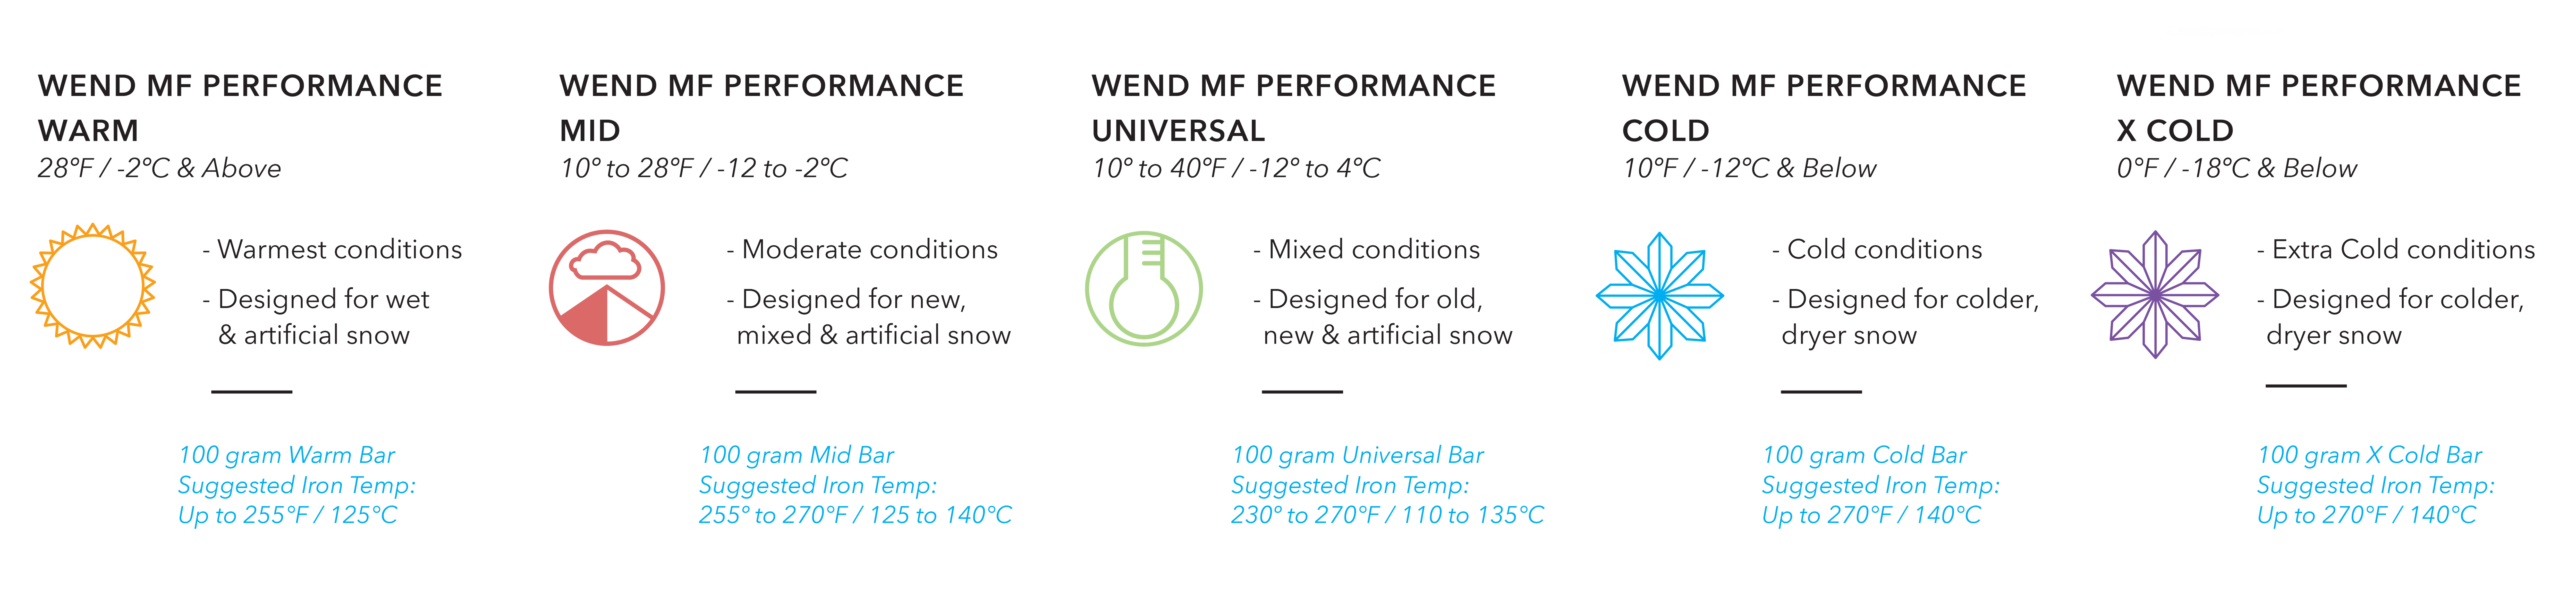 WEND MF PERFORMANCE WARM 28ºF / -2ºC & Above. - Warmest conditions - Designed for wet   & artificial snow. 100 gram Warm Bar Suggested Iron Temp:  Up to 255°F / 125°C. WEND MF PERFORMANCE  MID 10º to 28ºF / -12 to -2ºC. - Moderate conditions - Designed for new,  mixed & artificial snow. 100 gram Mid Bar Suggested Iron Temp:  255º to 270°F / 125 to 140°C. WEND MF PERFORMANCE  UNIVERSAL 10º to 40ºF / -12º to 4ºC. - Mixed conditions - Designed for old, new & artificial snow. 100 gram Universal Bar Suggested Iron Temp:  230º to 270°F / 110 to 135°C. WEND MF PERFORMANCE  COLD 10ºF / -12ºC & Below. - Cold conditions - Designed for colder, dryer snow. 100 gram Cold Bar Suggested Iron Temp:  Up to 270°F / 140°C. WEND MF PERFORMANCE   X COLD 0°F / -18ºC & Below. - Extra Cold conditions - Designed for colder, dryer snow. 100 gram X Cold Bar Suggested Iron Temp:  Up to 270°F / 140°C. 